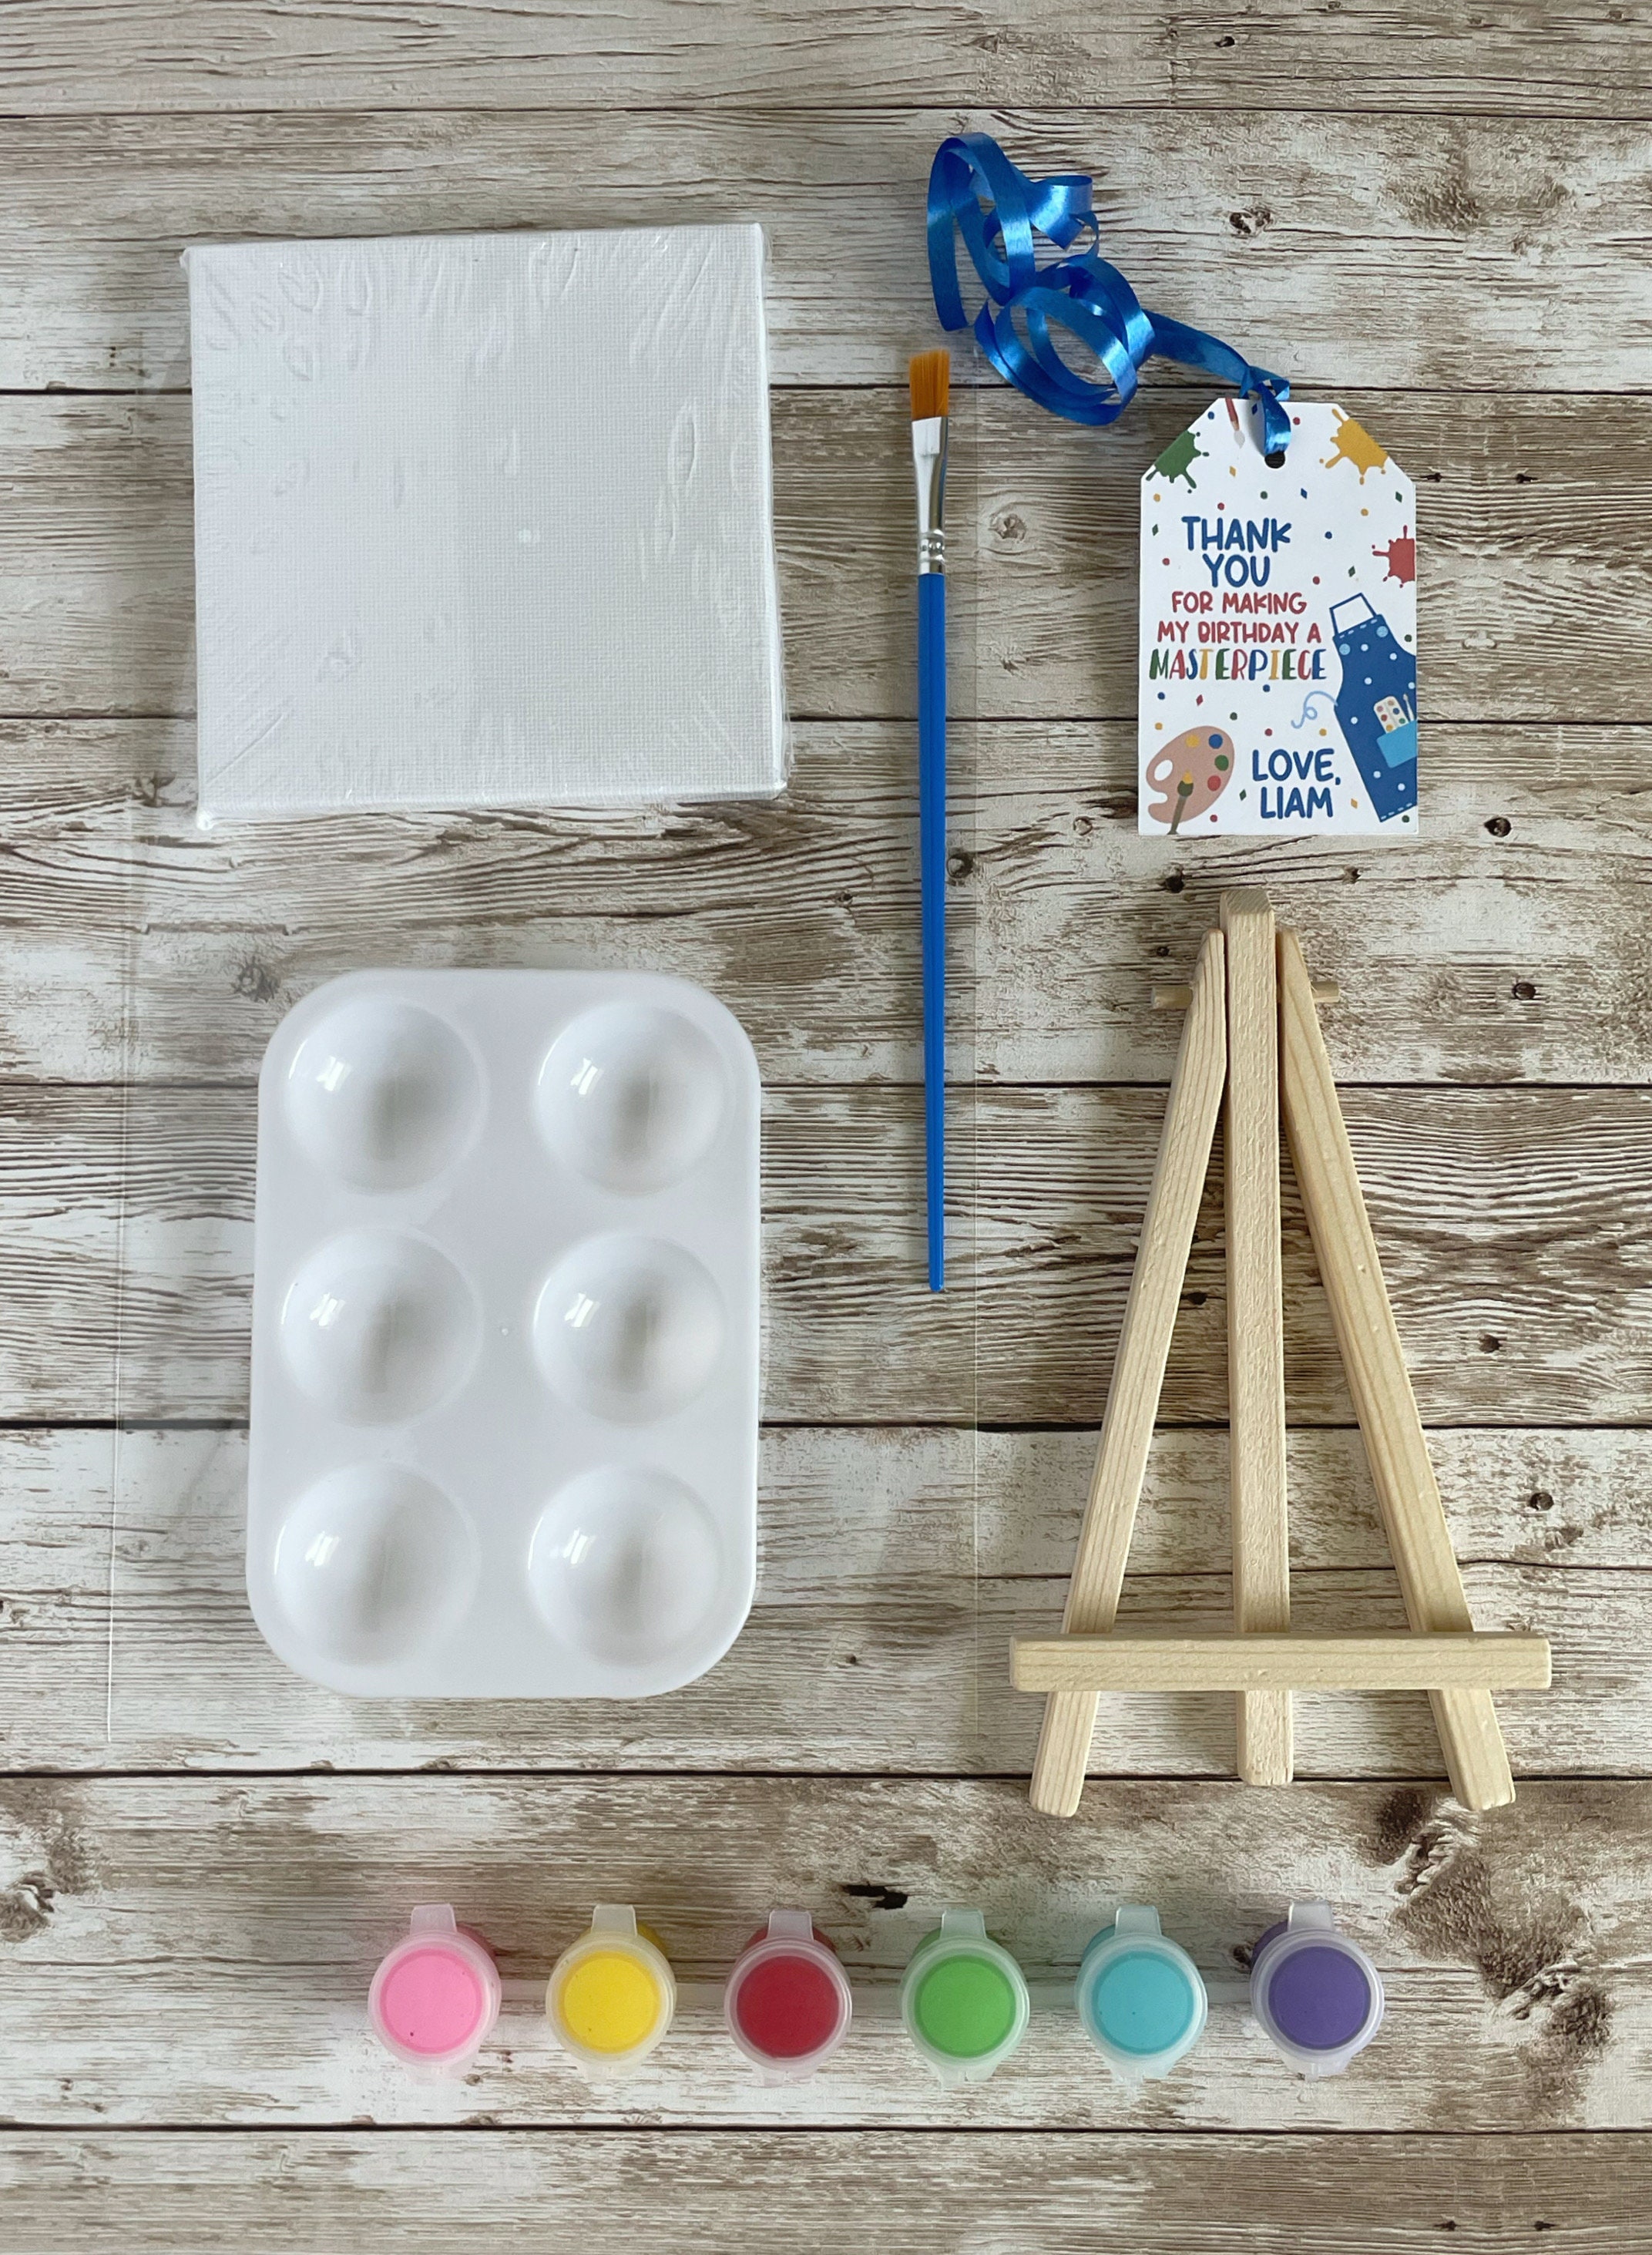 DIY Mini Painting Easel Kits/mini Easel Party Favors/paint Your Own Picture  Mini Easel Craft/birthday Painting Party Favor/birthday Favor 